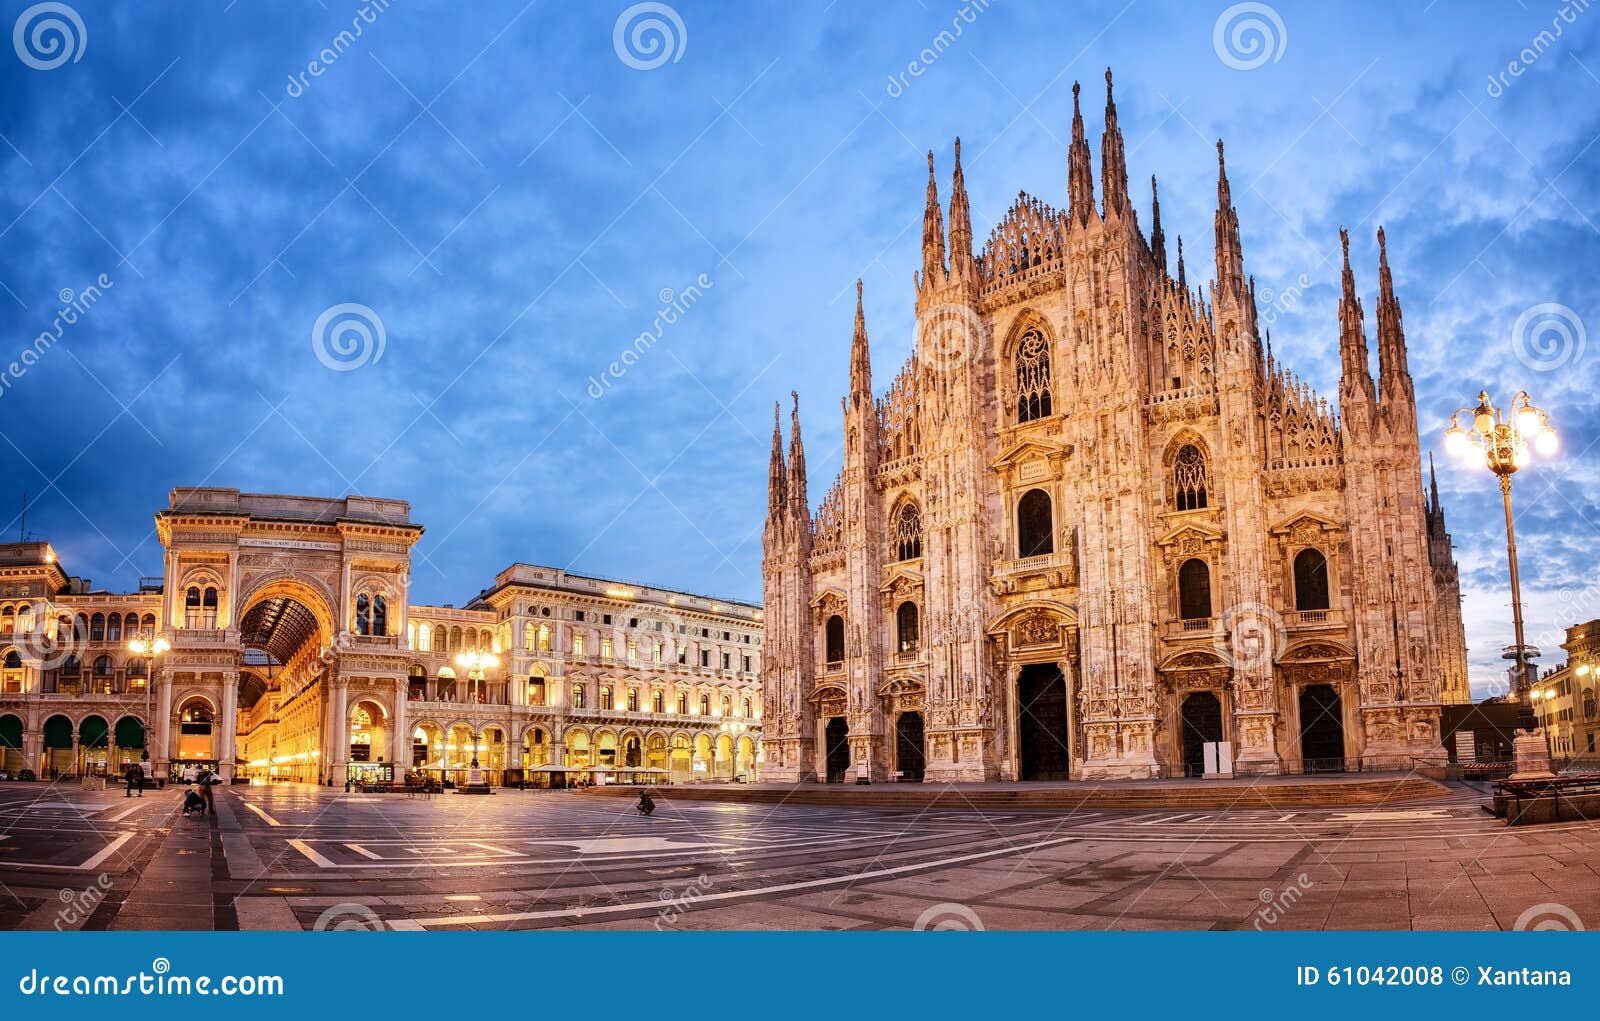 milan cathedral, italy